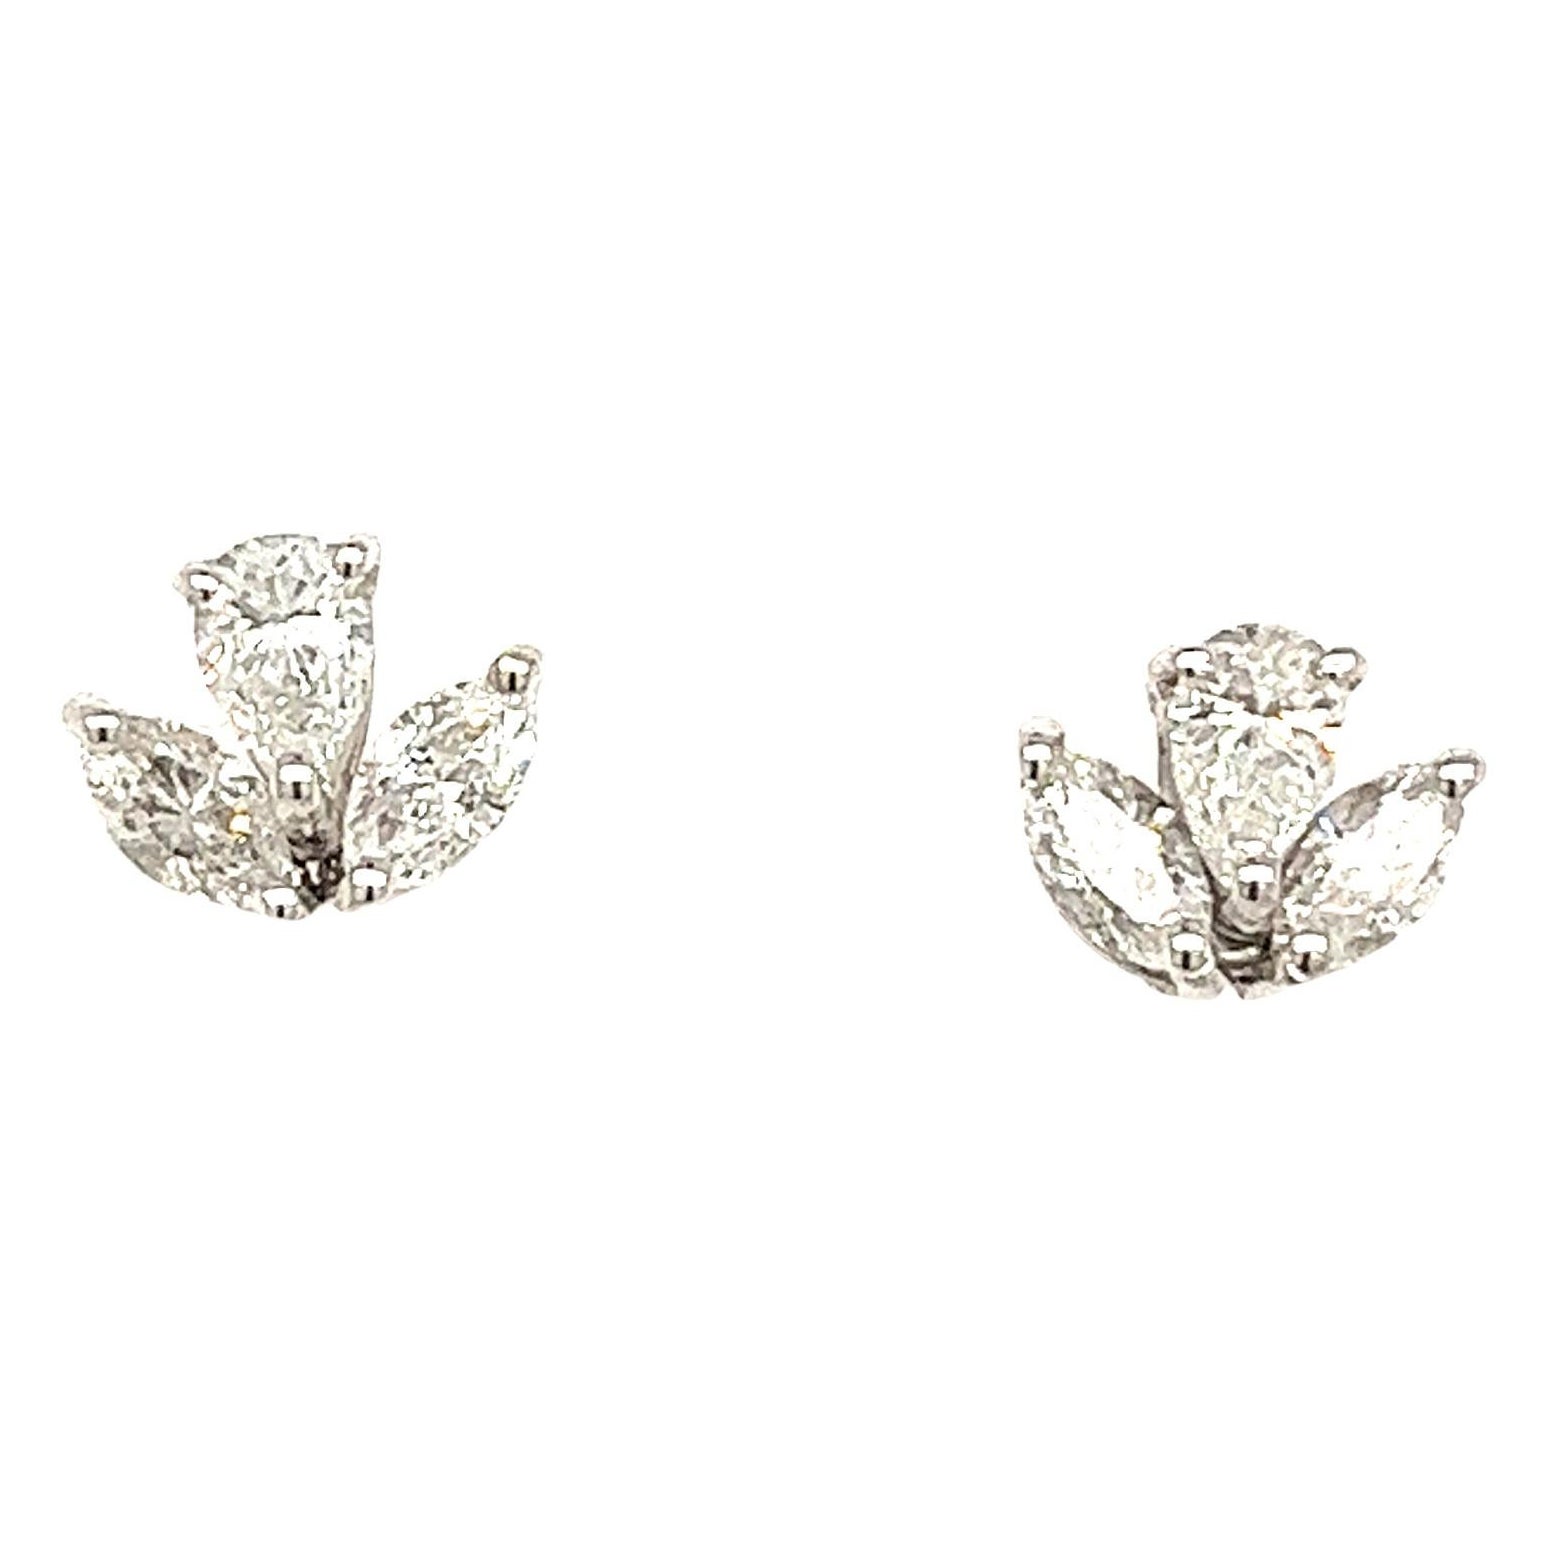 18ct White Gold Diamond Stud Earrings Set With 0.80ct Marquise & Pear Diamonds For Sale